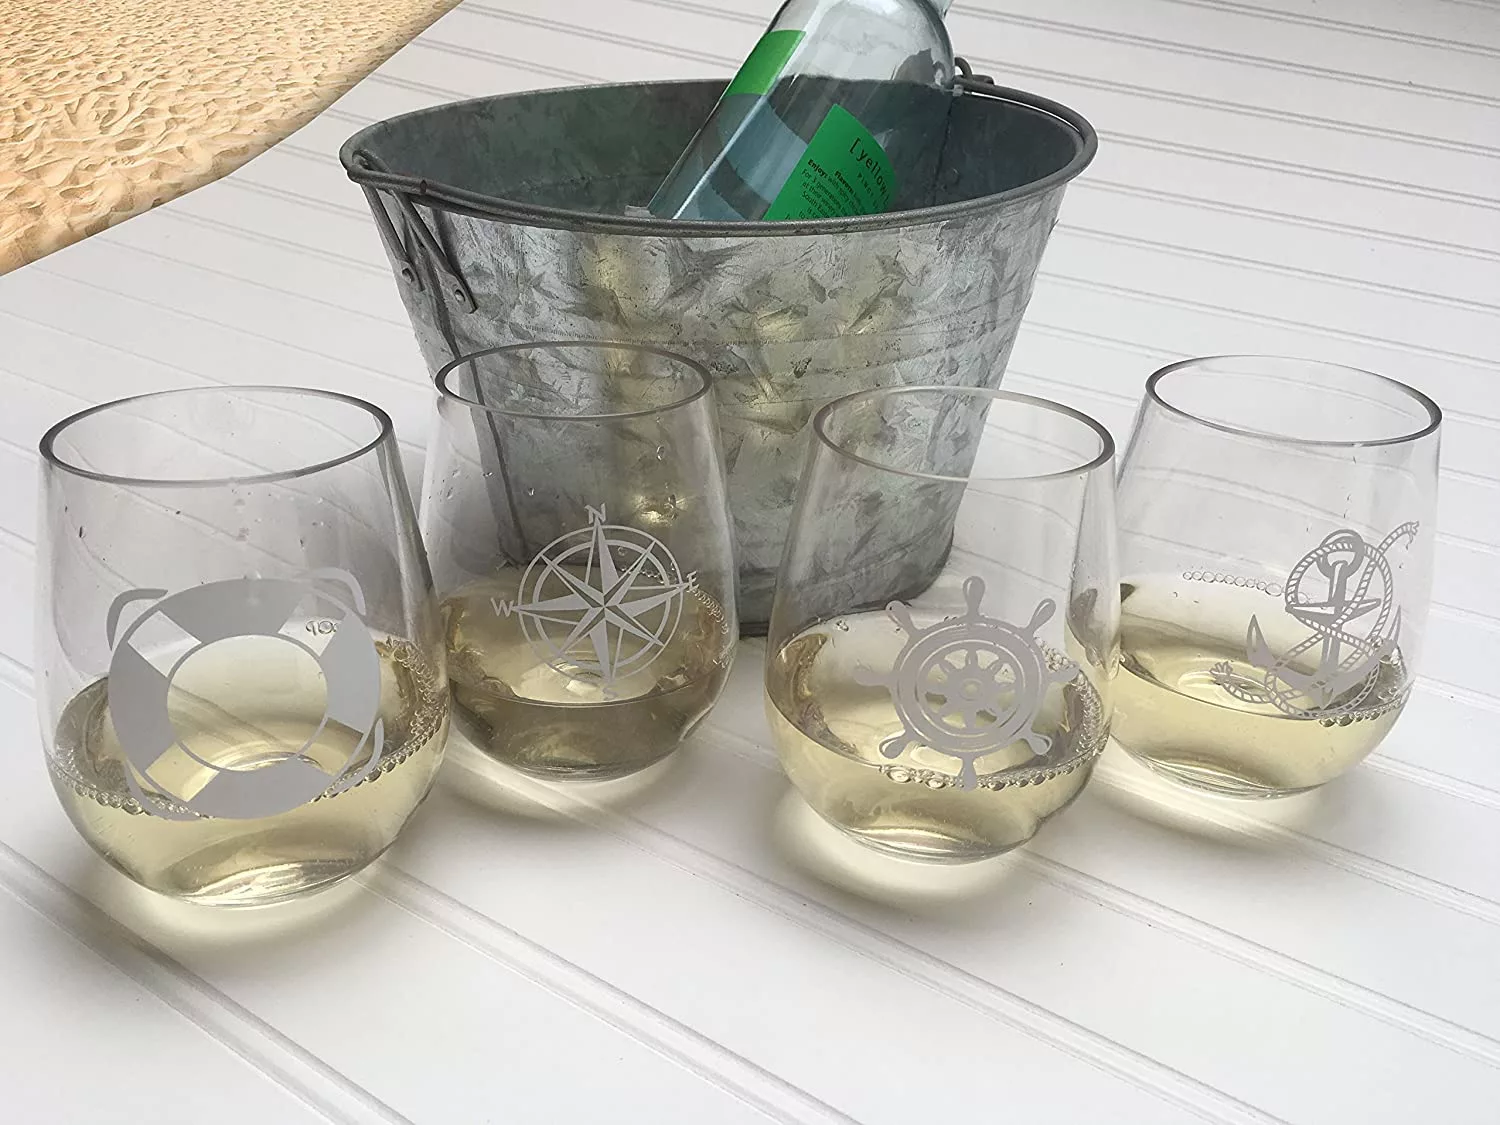 Bottle of wine in a bucket with the Shatterproof Plastic Nautical Wine Glasses